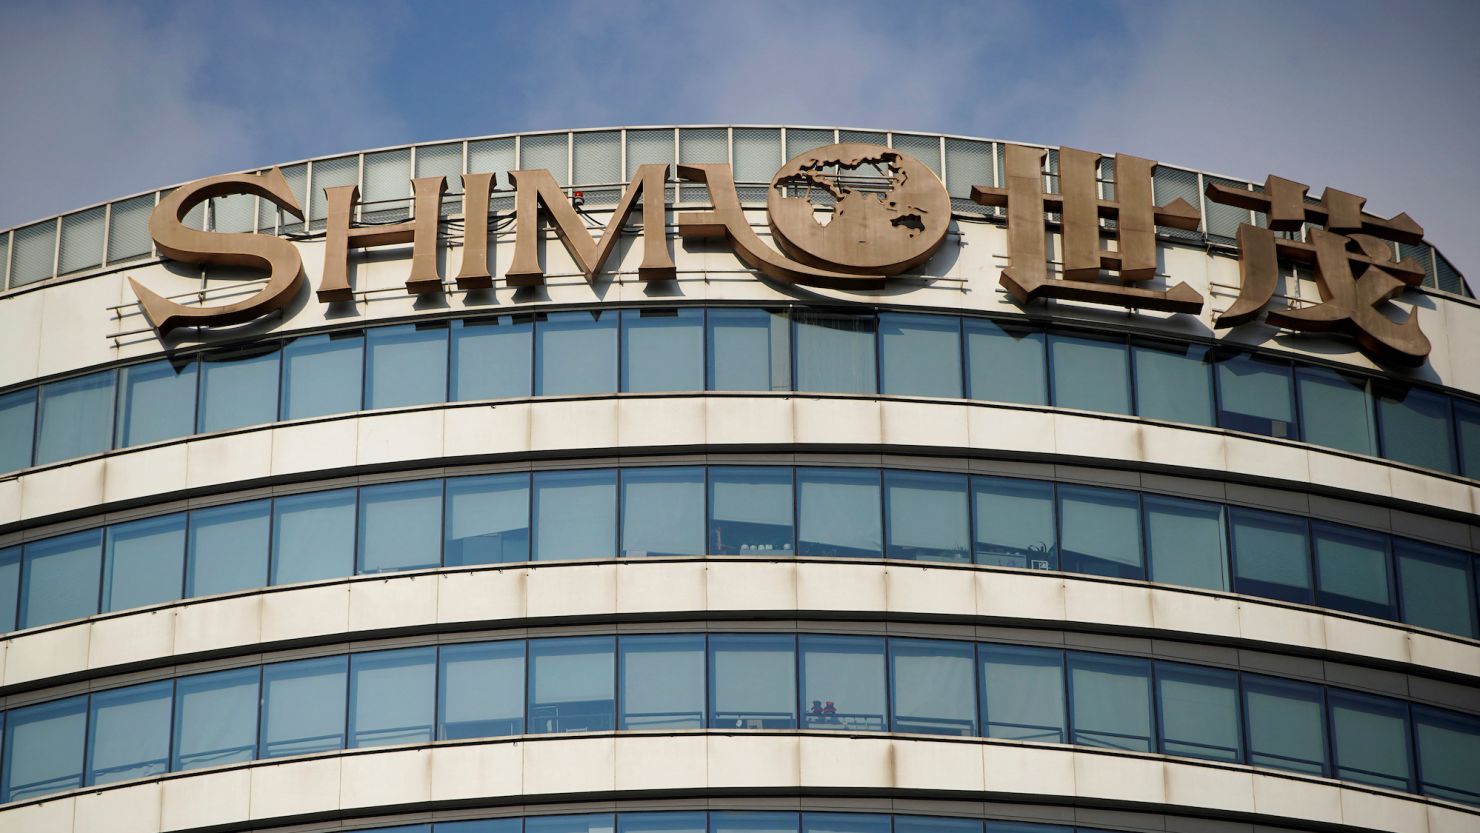 Shimao Group is a property developer based in Shanghai.